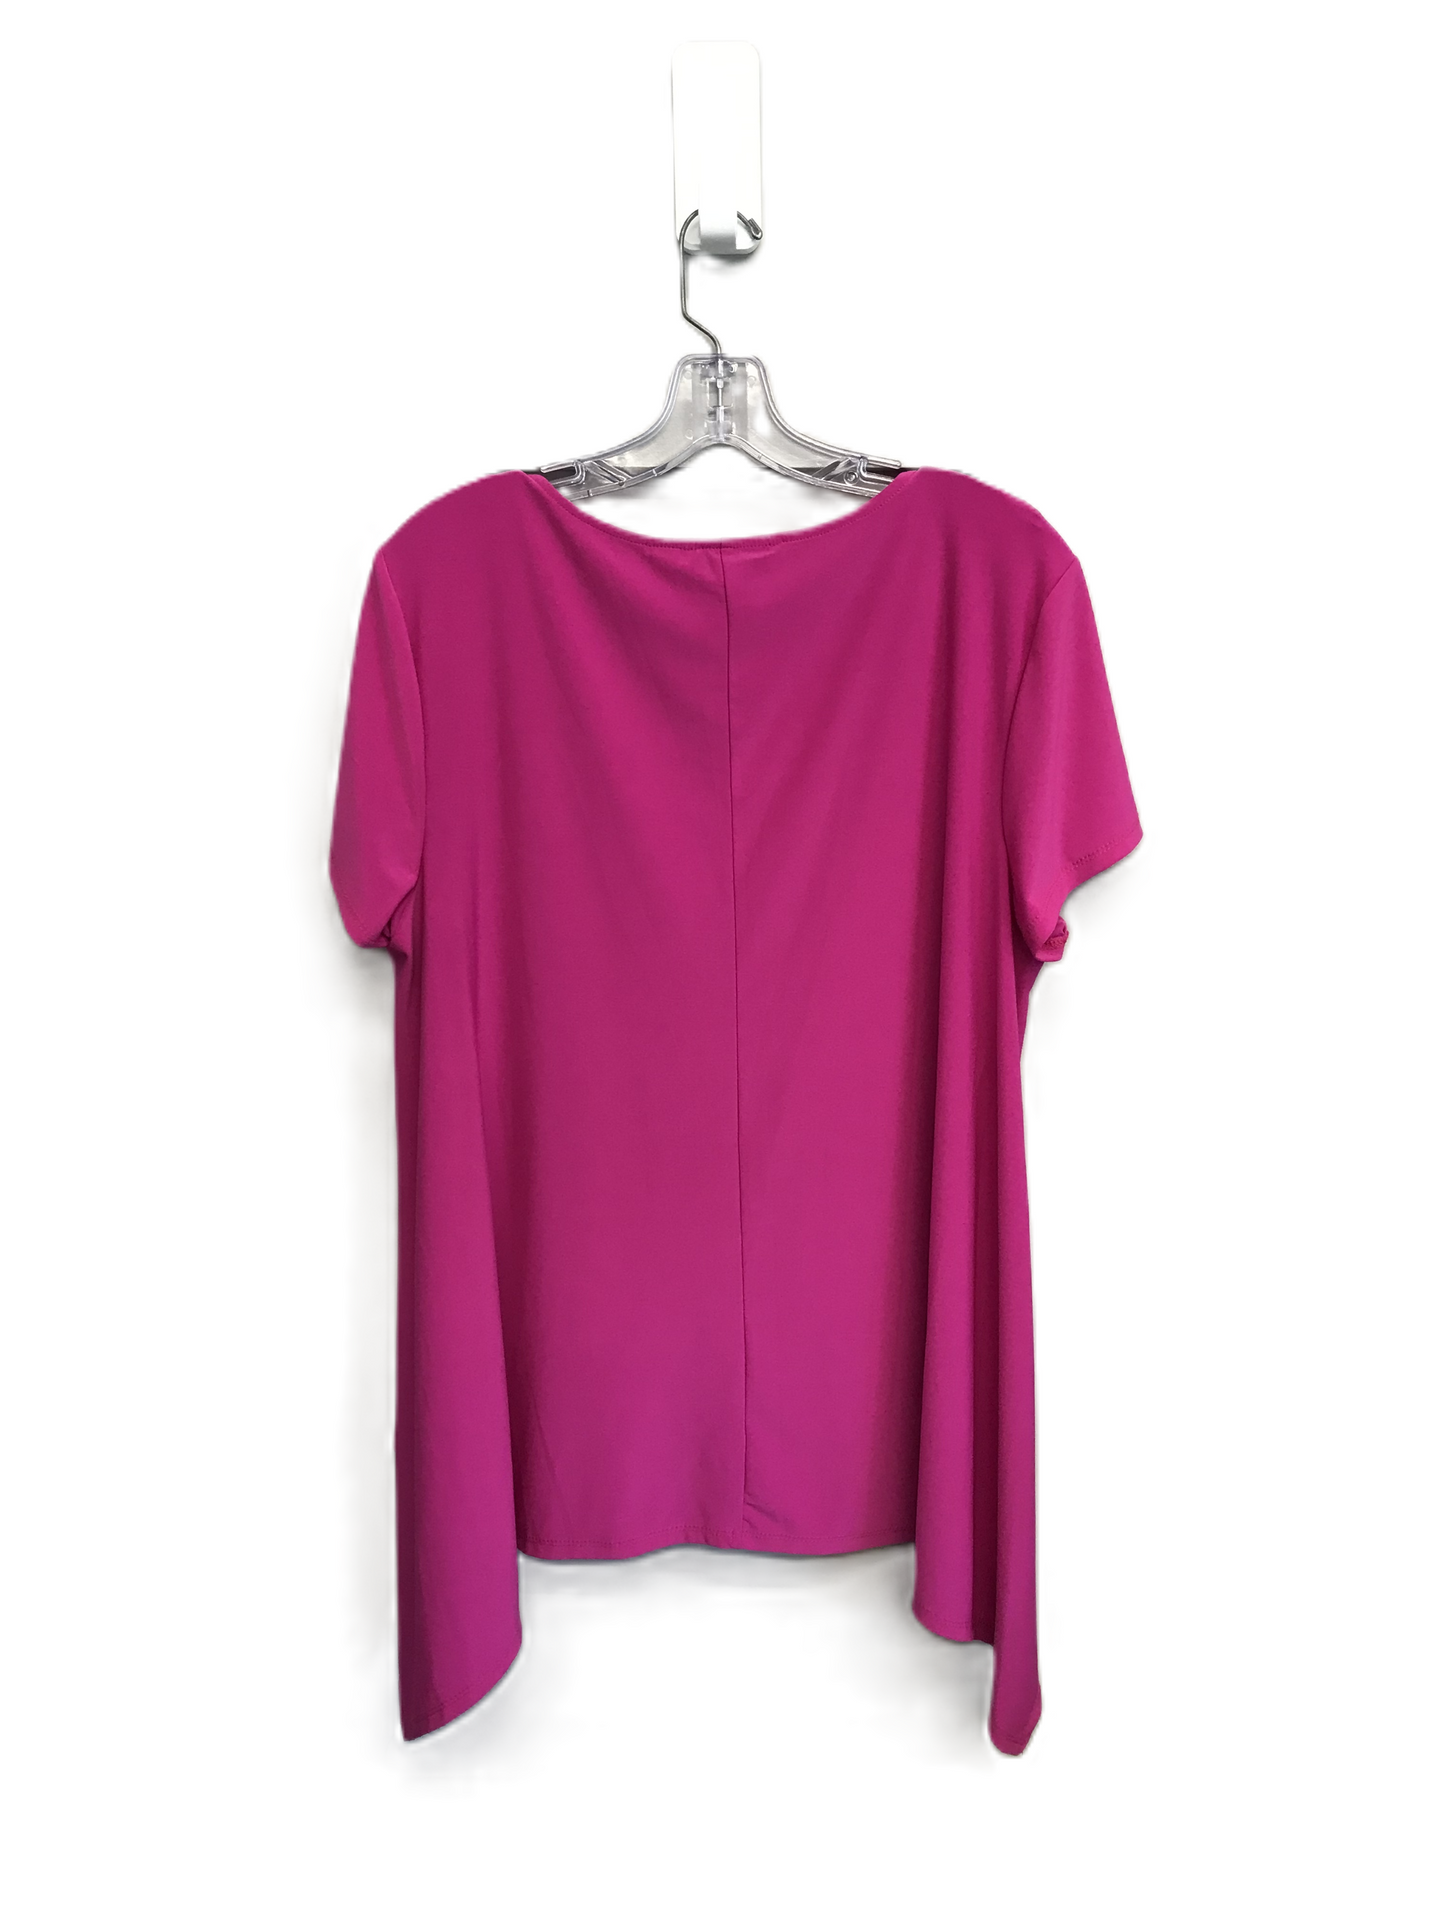 Pink Top Short Sleeve By Chaus, Size: Xl